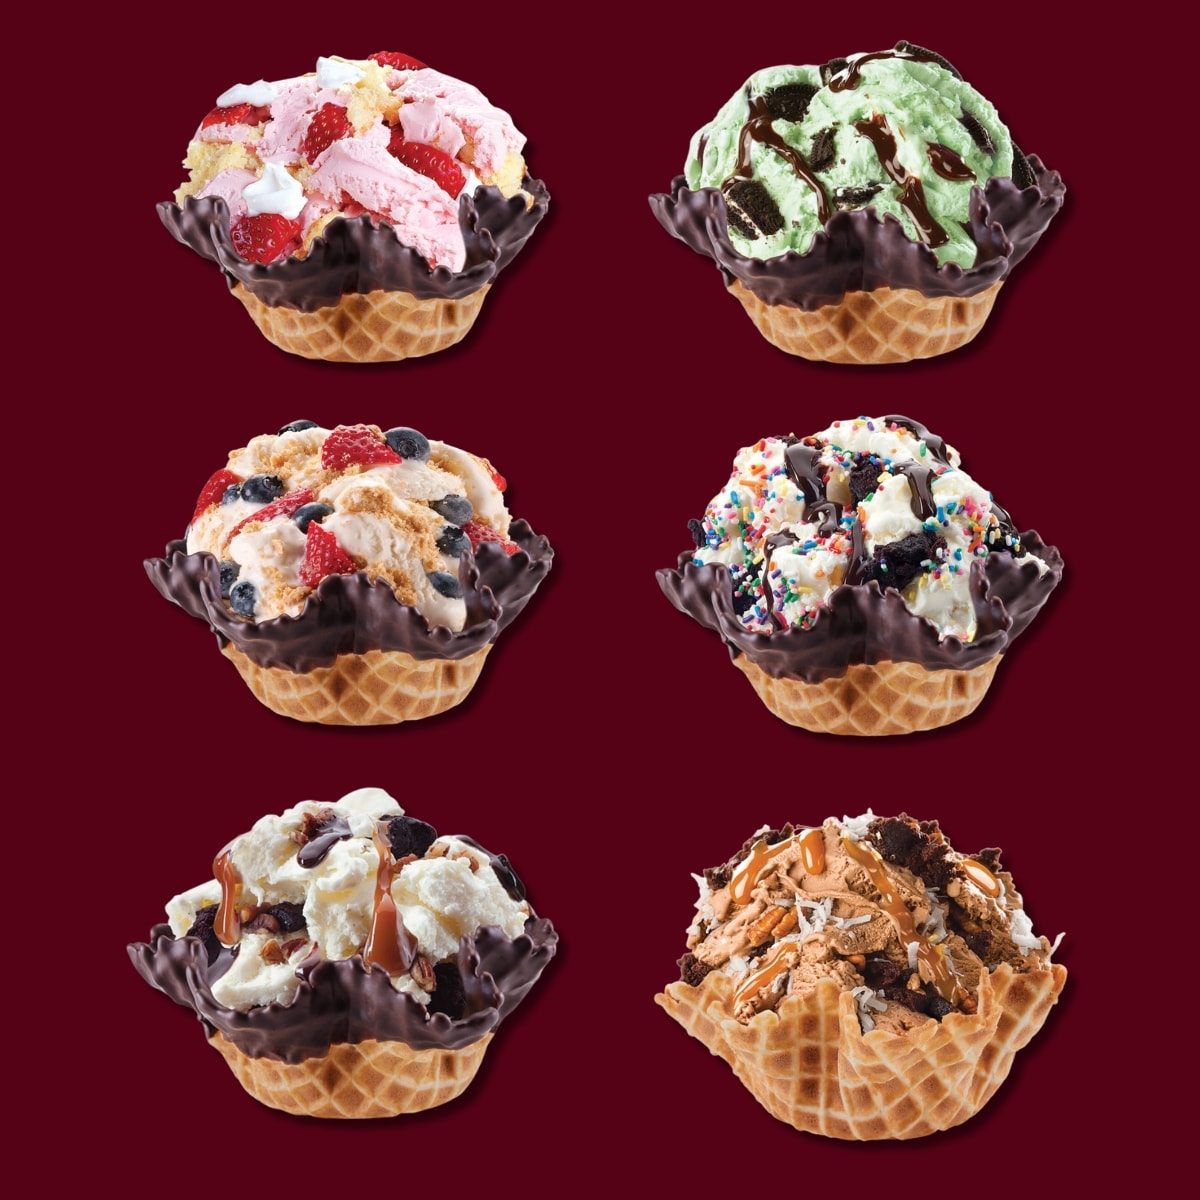 20 Best Cold Stone Flavors, Ranked featuring 6 Cold Stone Ice Cream Waffle Bowls with Different Flavors